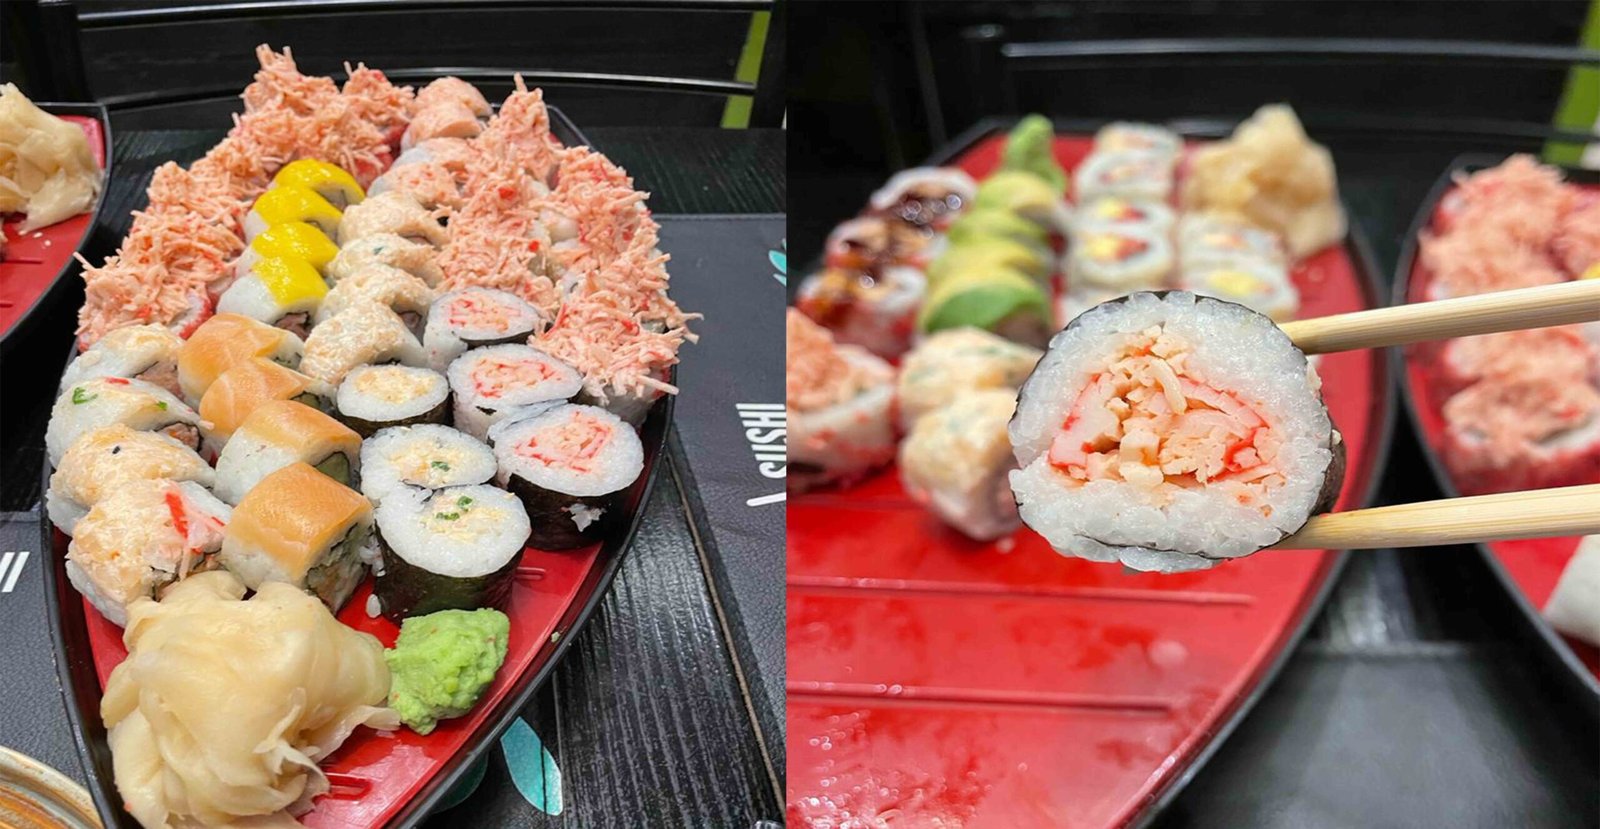 You are currently viewing Open Sushi at Sushiholic Hazmieh.